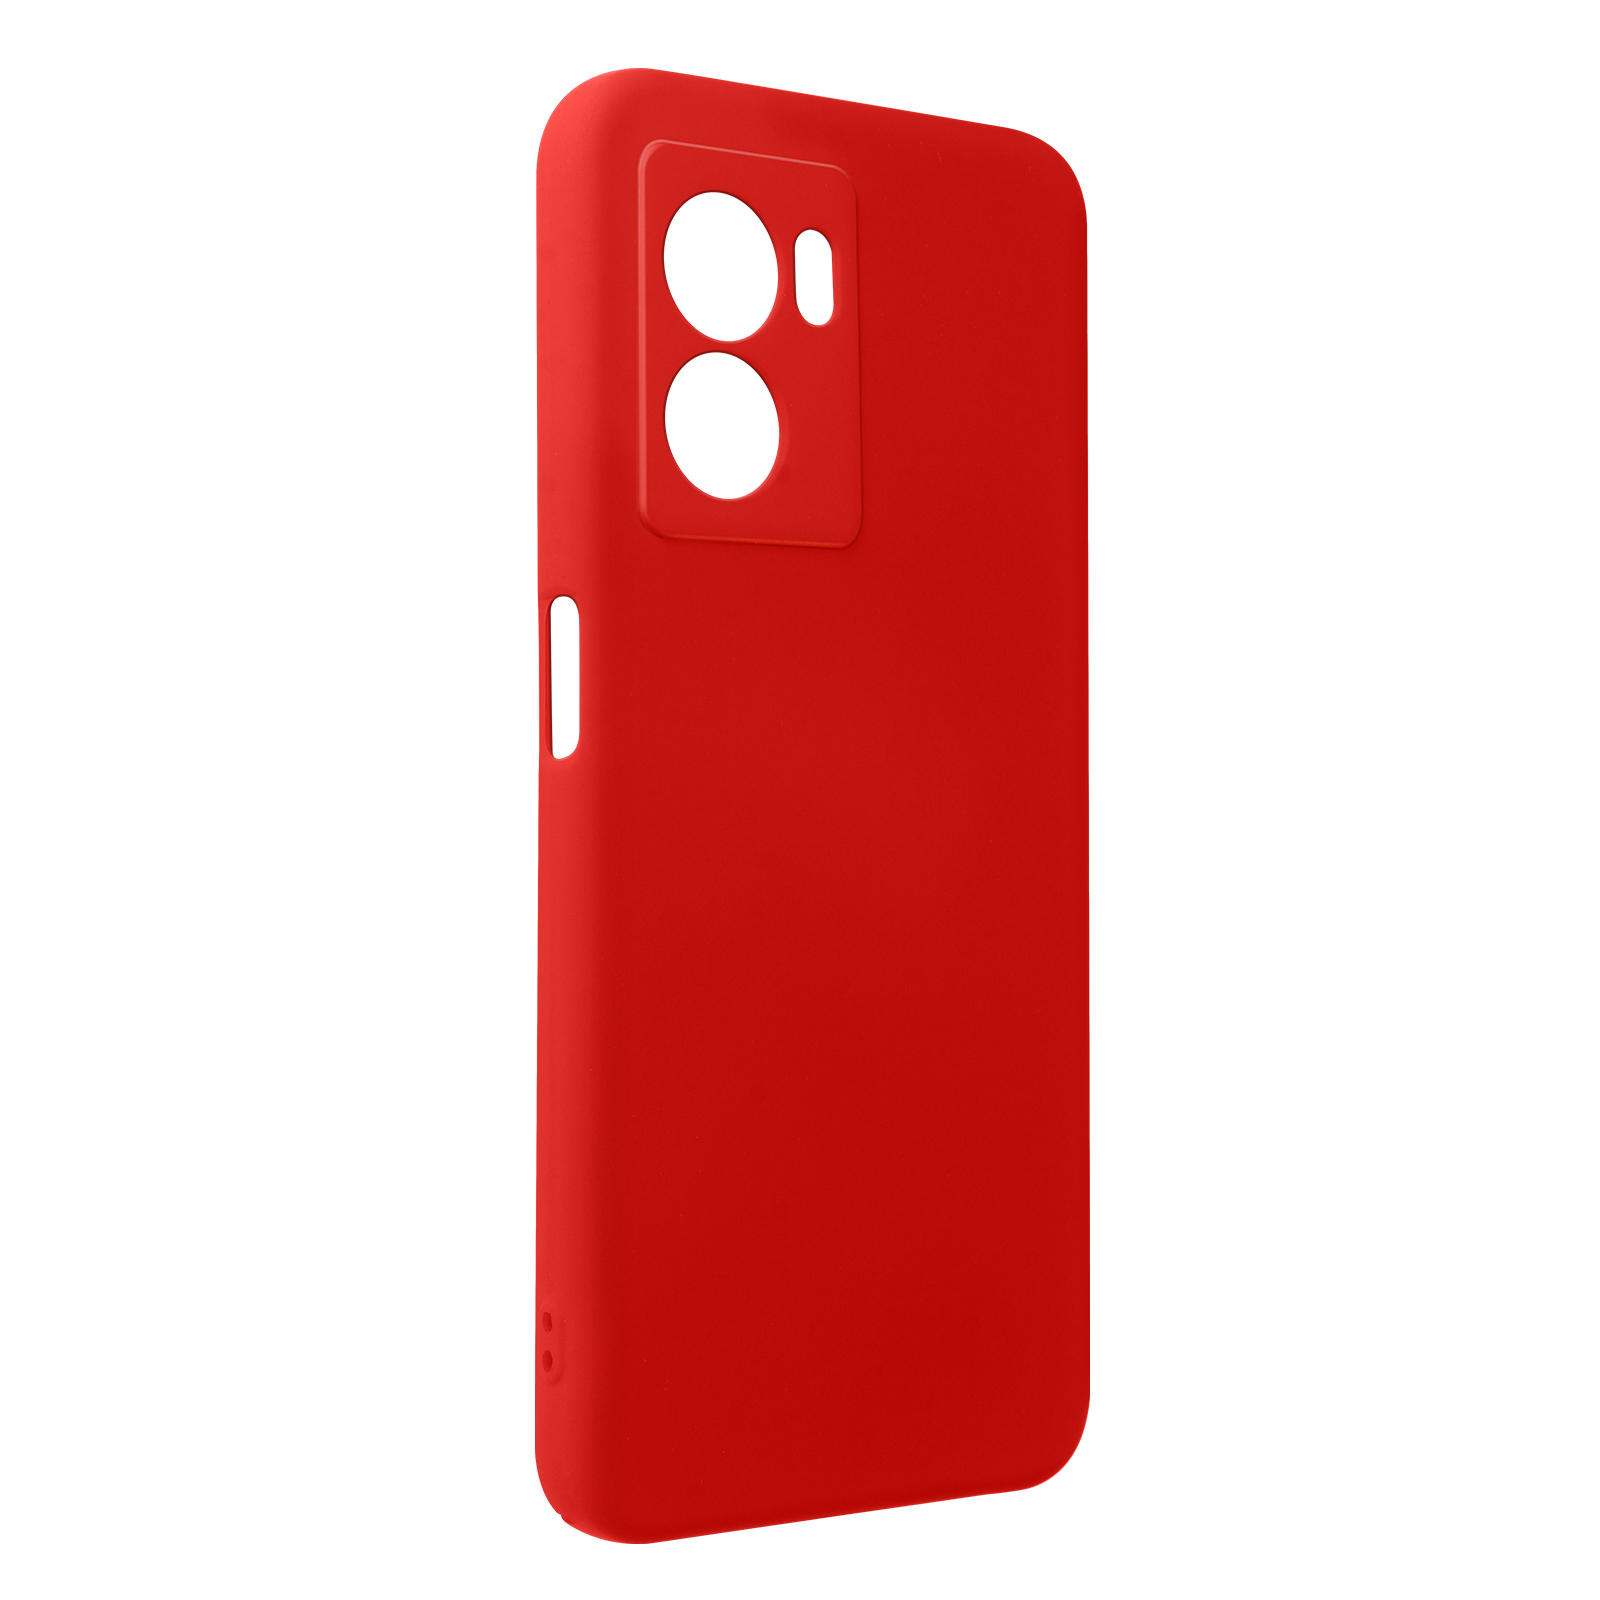 AVIZAR Soft Touch Rot Oppo, Series, Oppo Backcover, A57